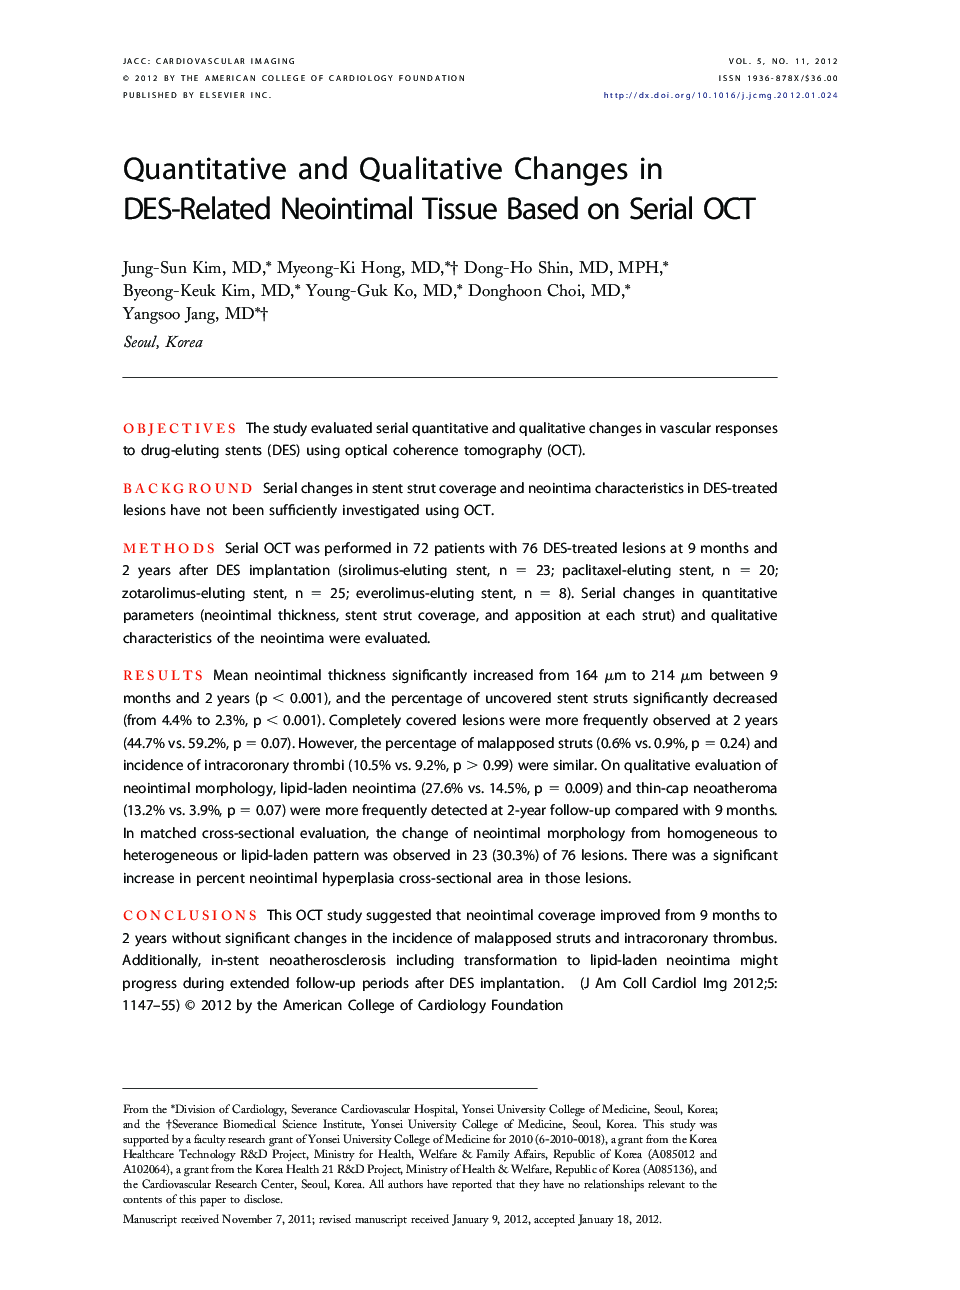 Quantitative and Qualitative Changes in DES-Related Neointimal Tissue Based on Serial OCT 